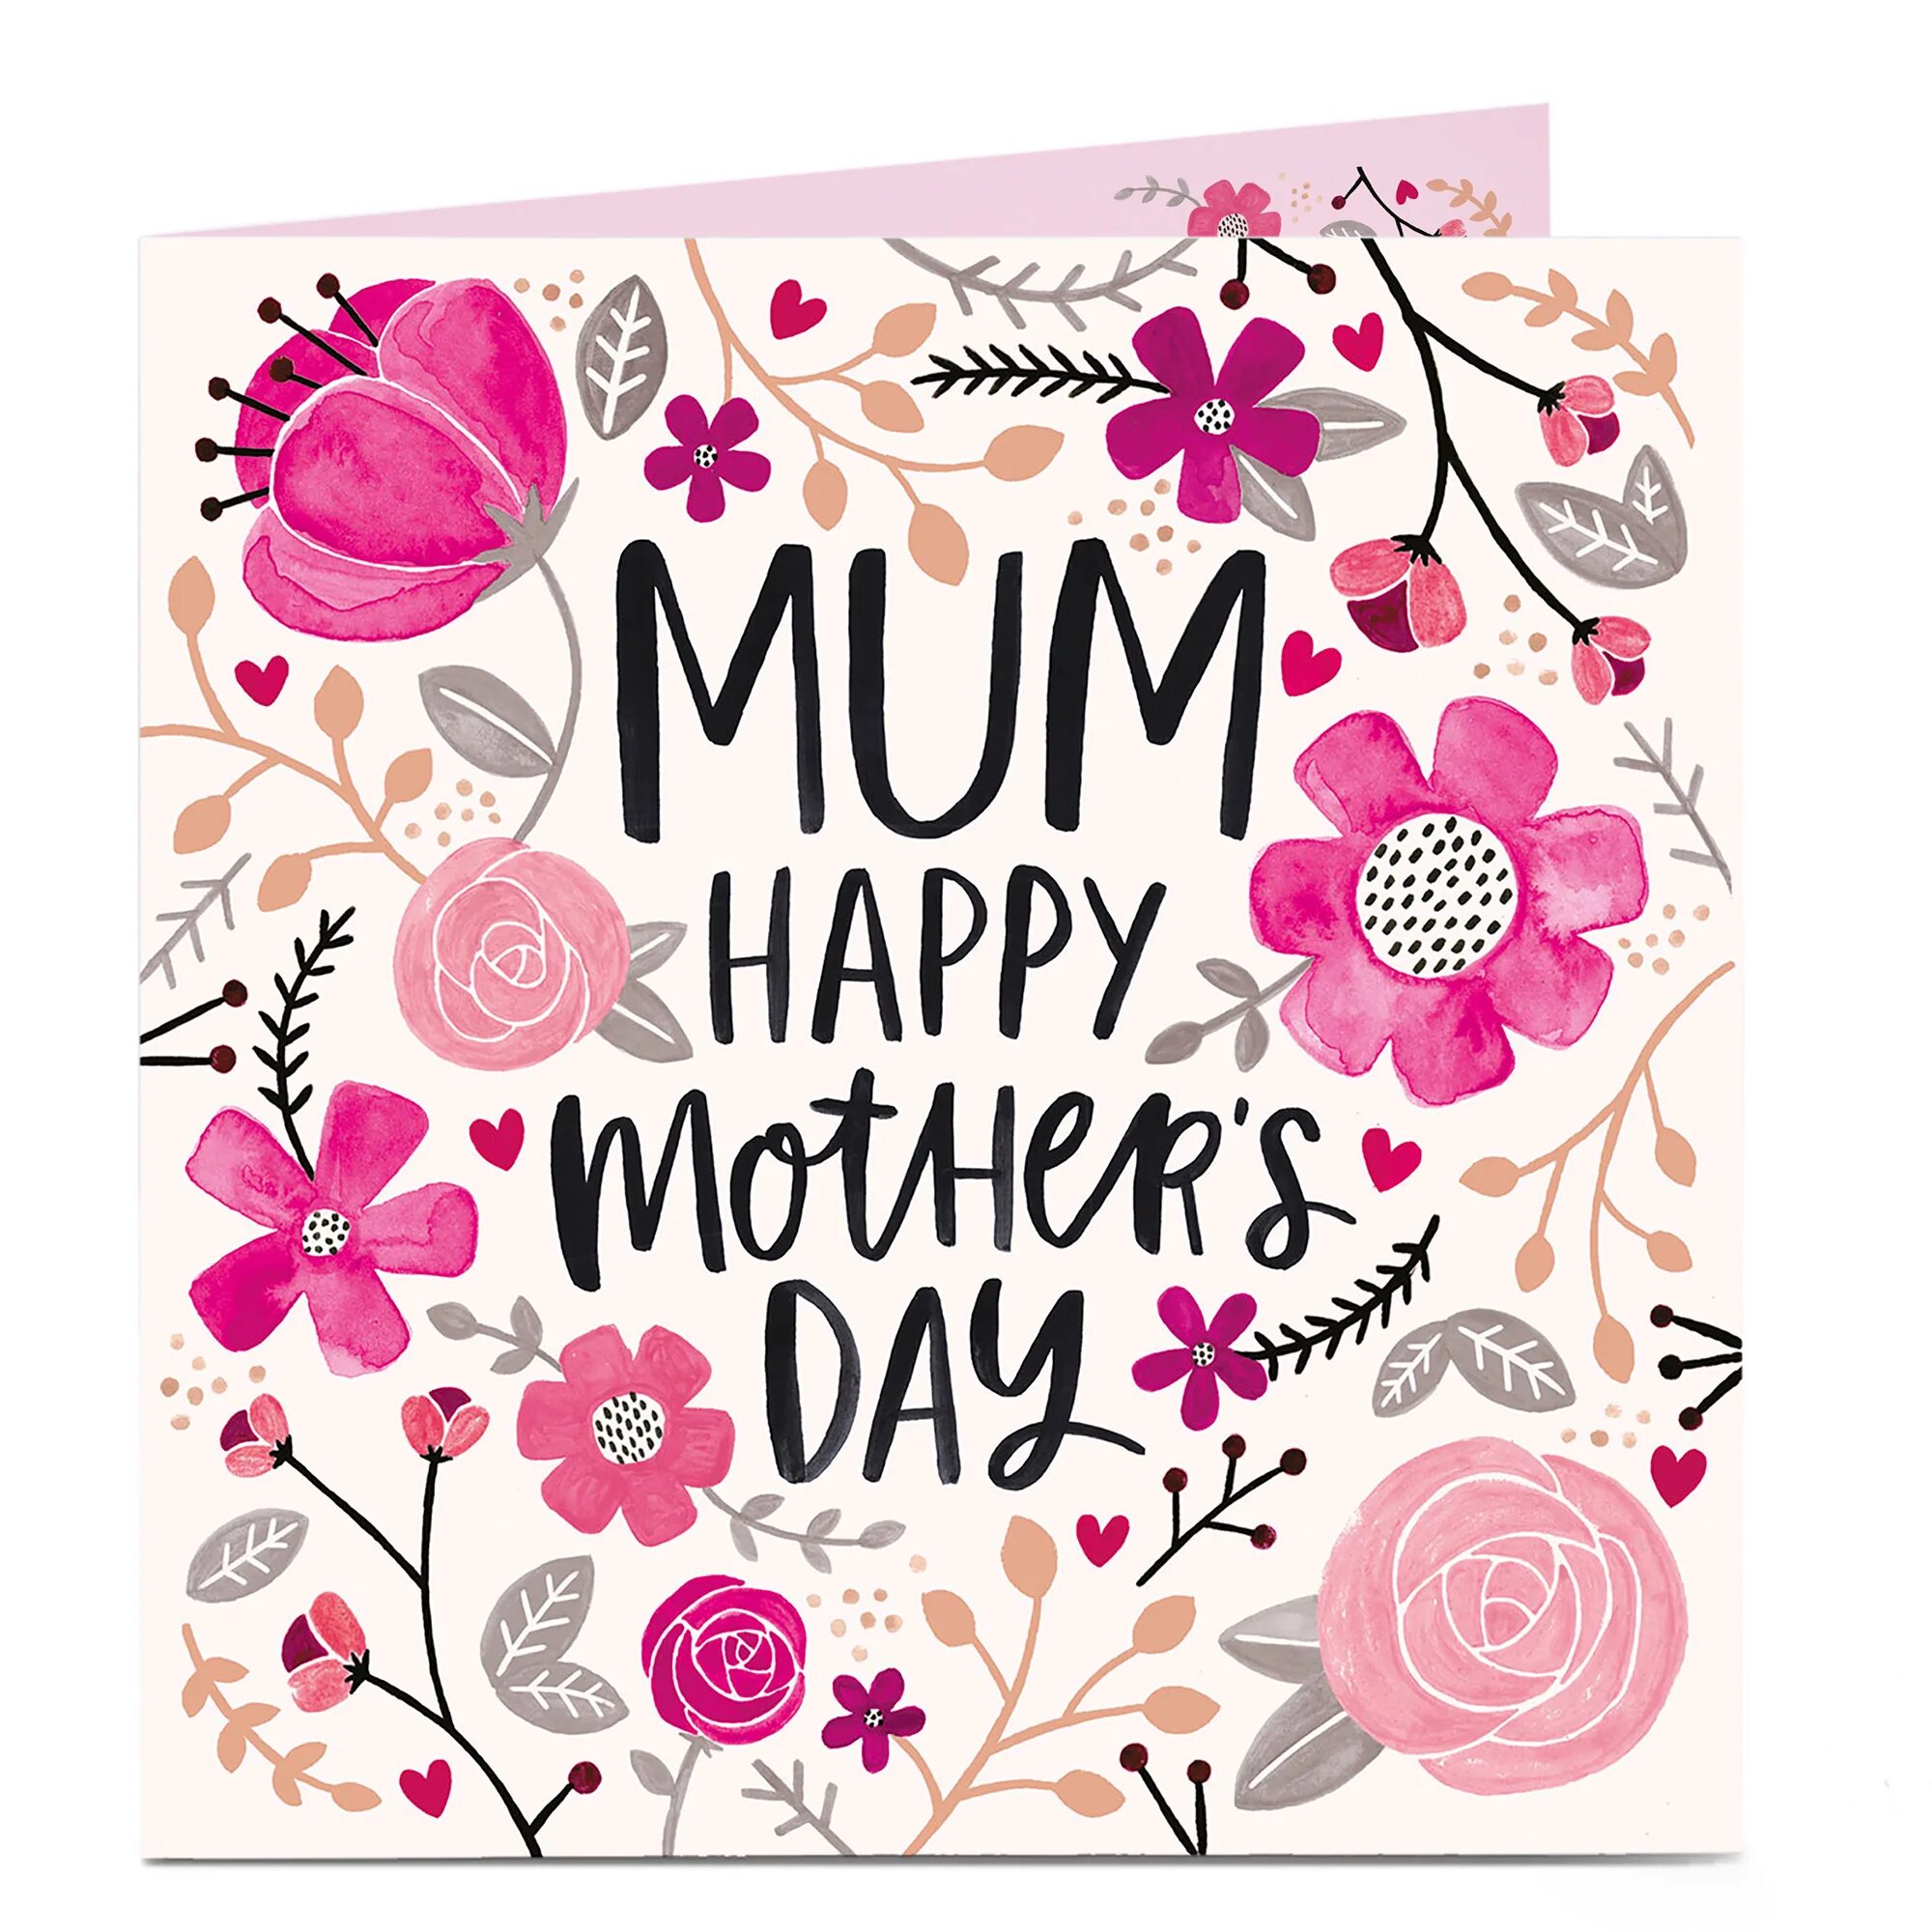 The day my mother made an apology. Mother's Day Greeting Card. Card for mum. Happy mother's Day Card. Mums Day Cards.